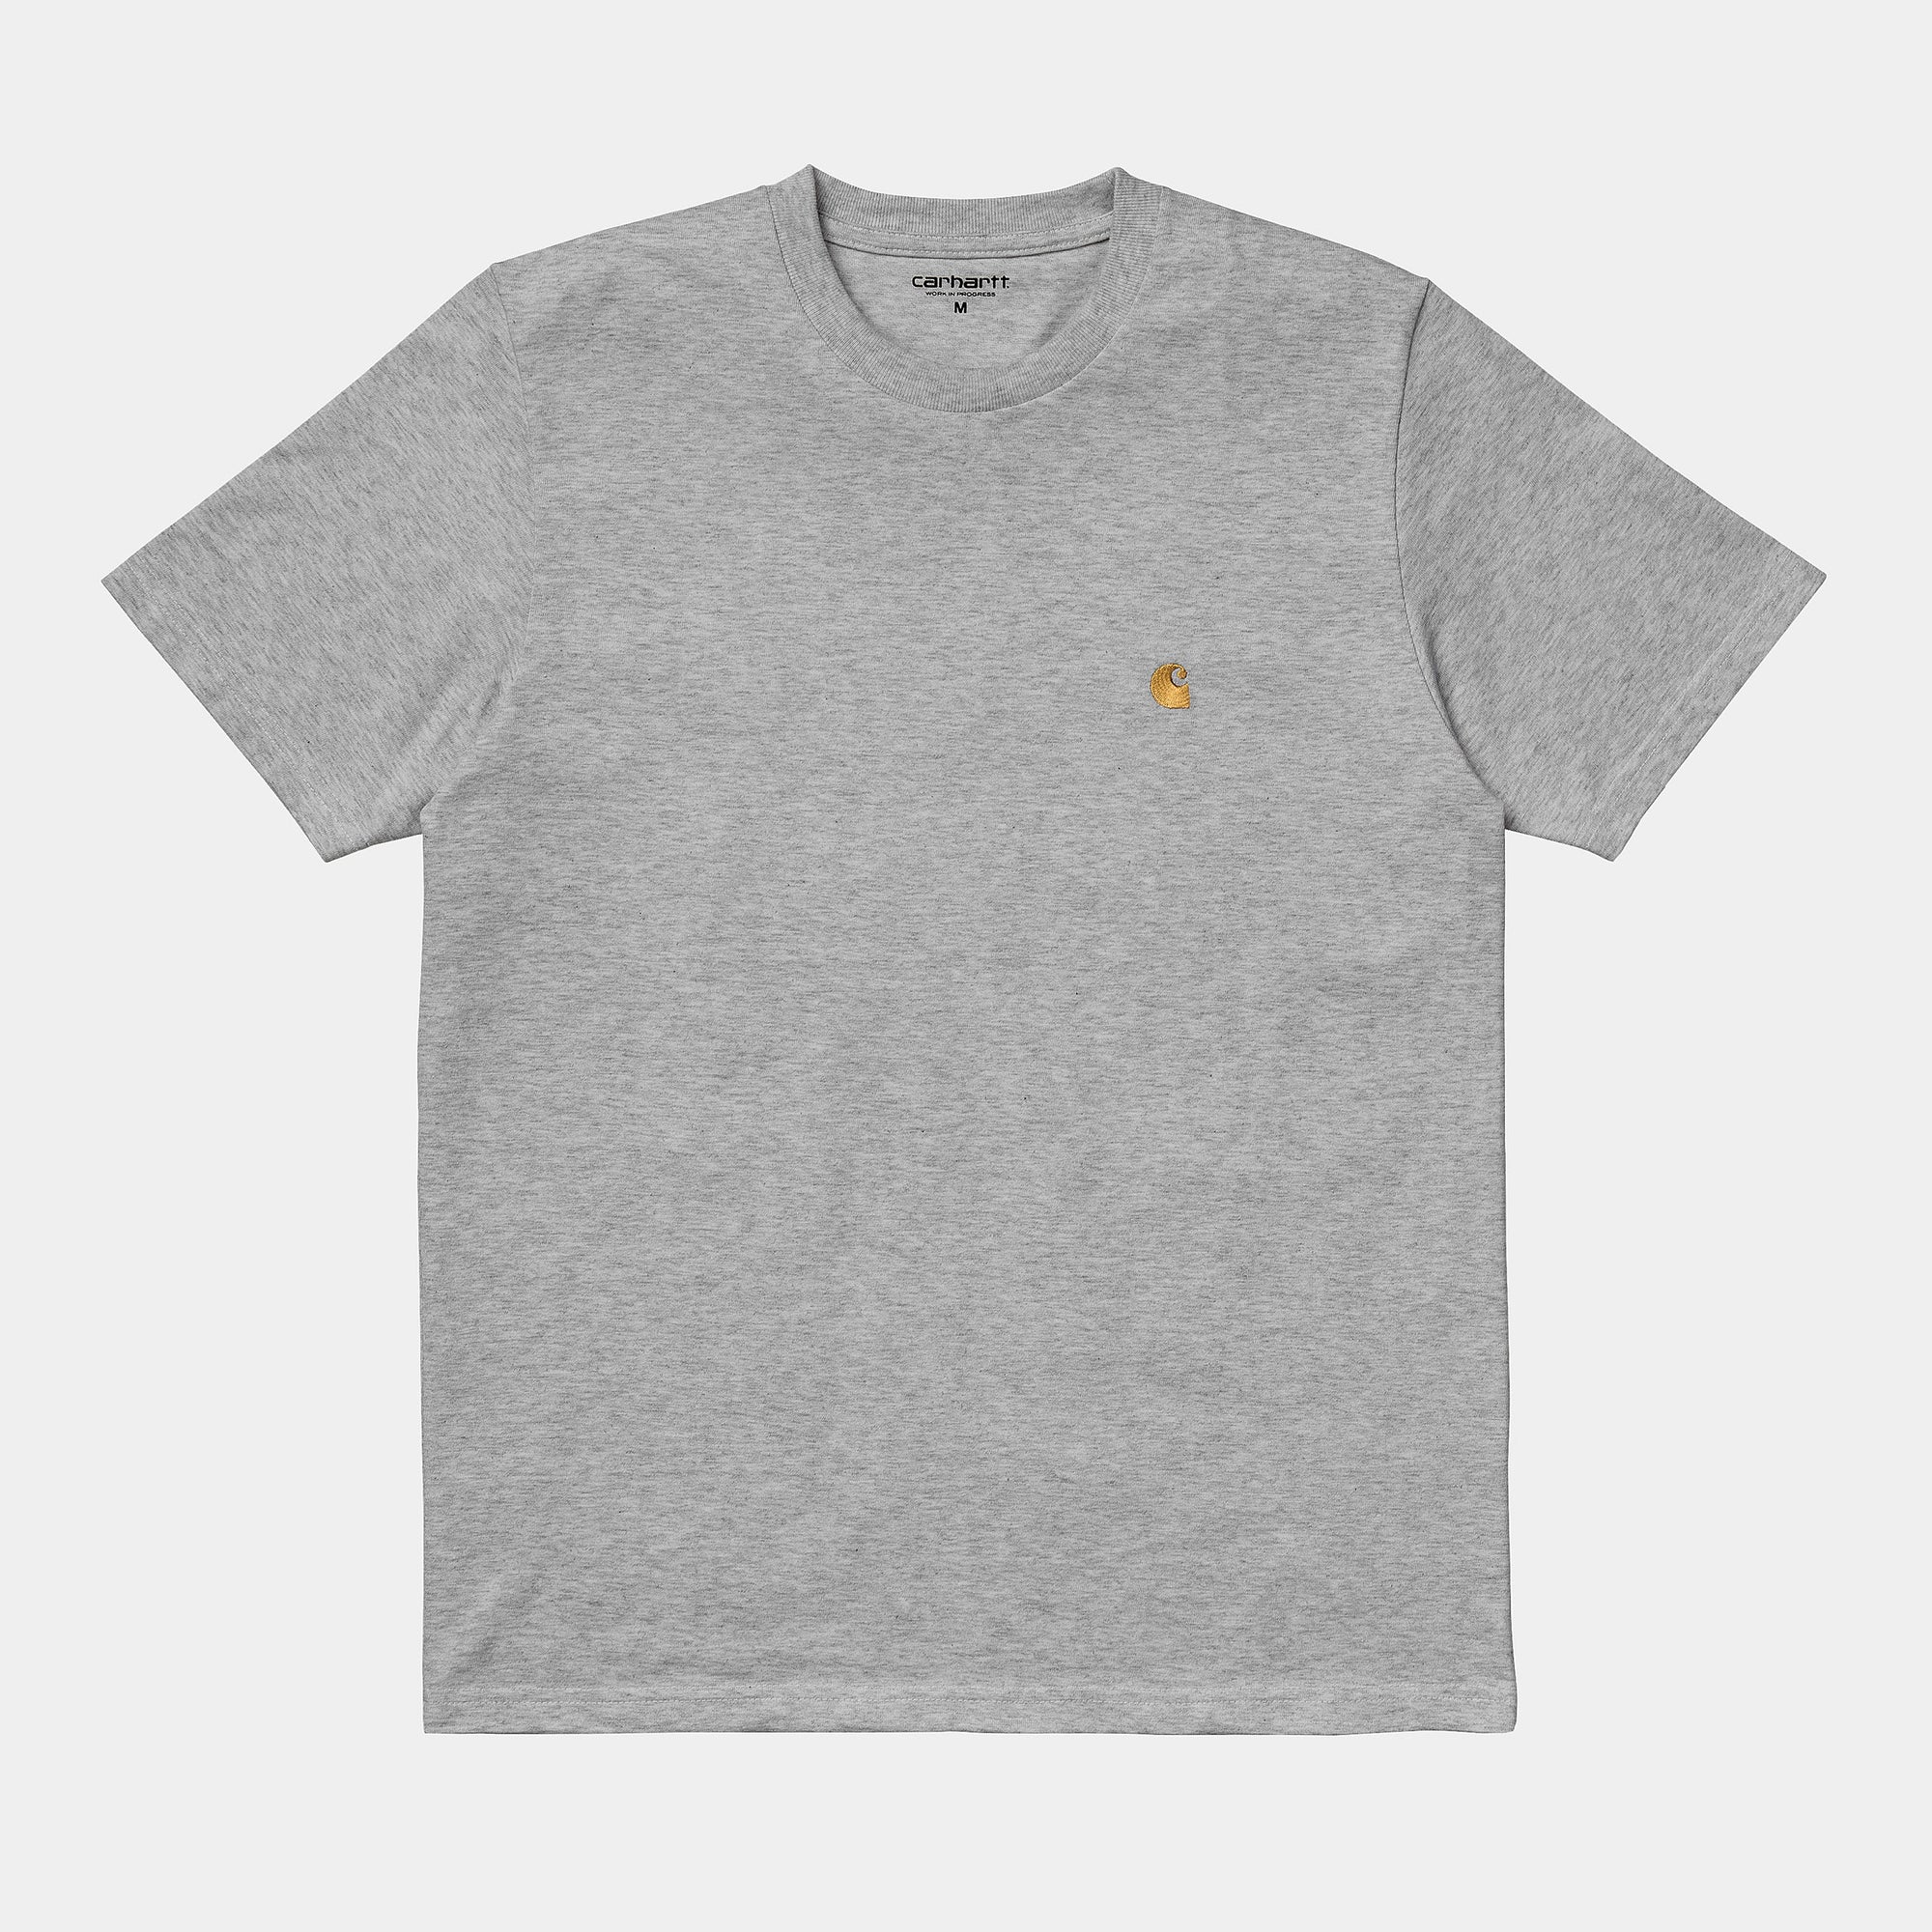 Carhartt WIP Chase T-Shirt - Grey Heather / Gold